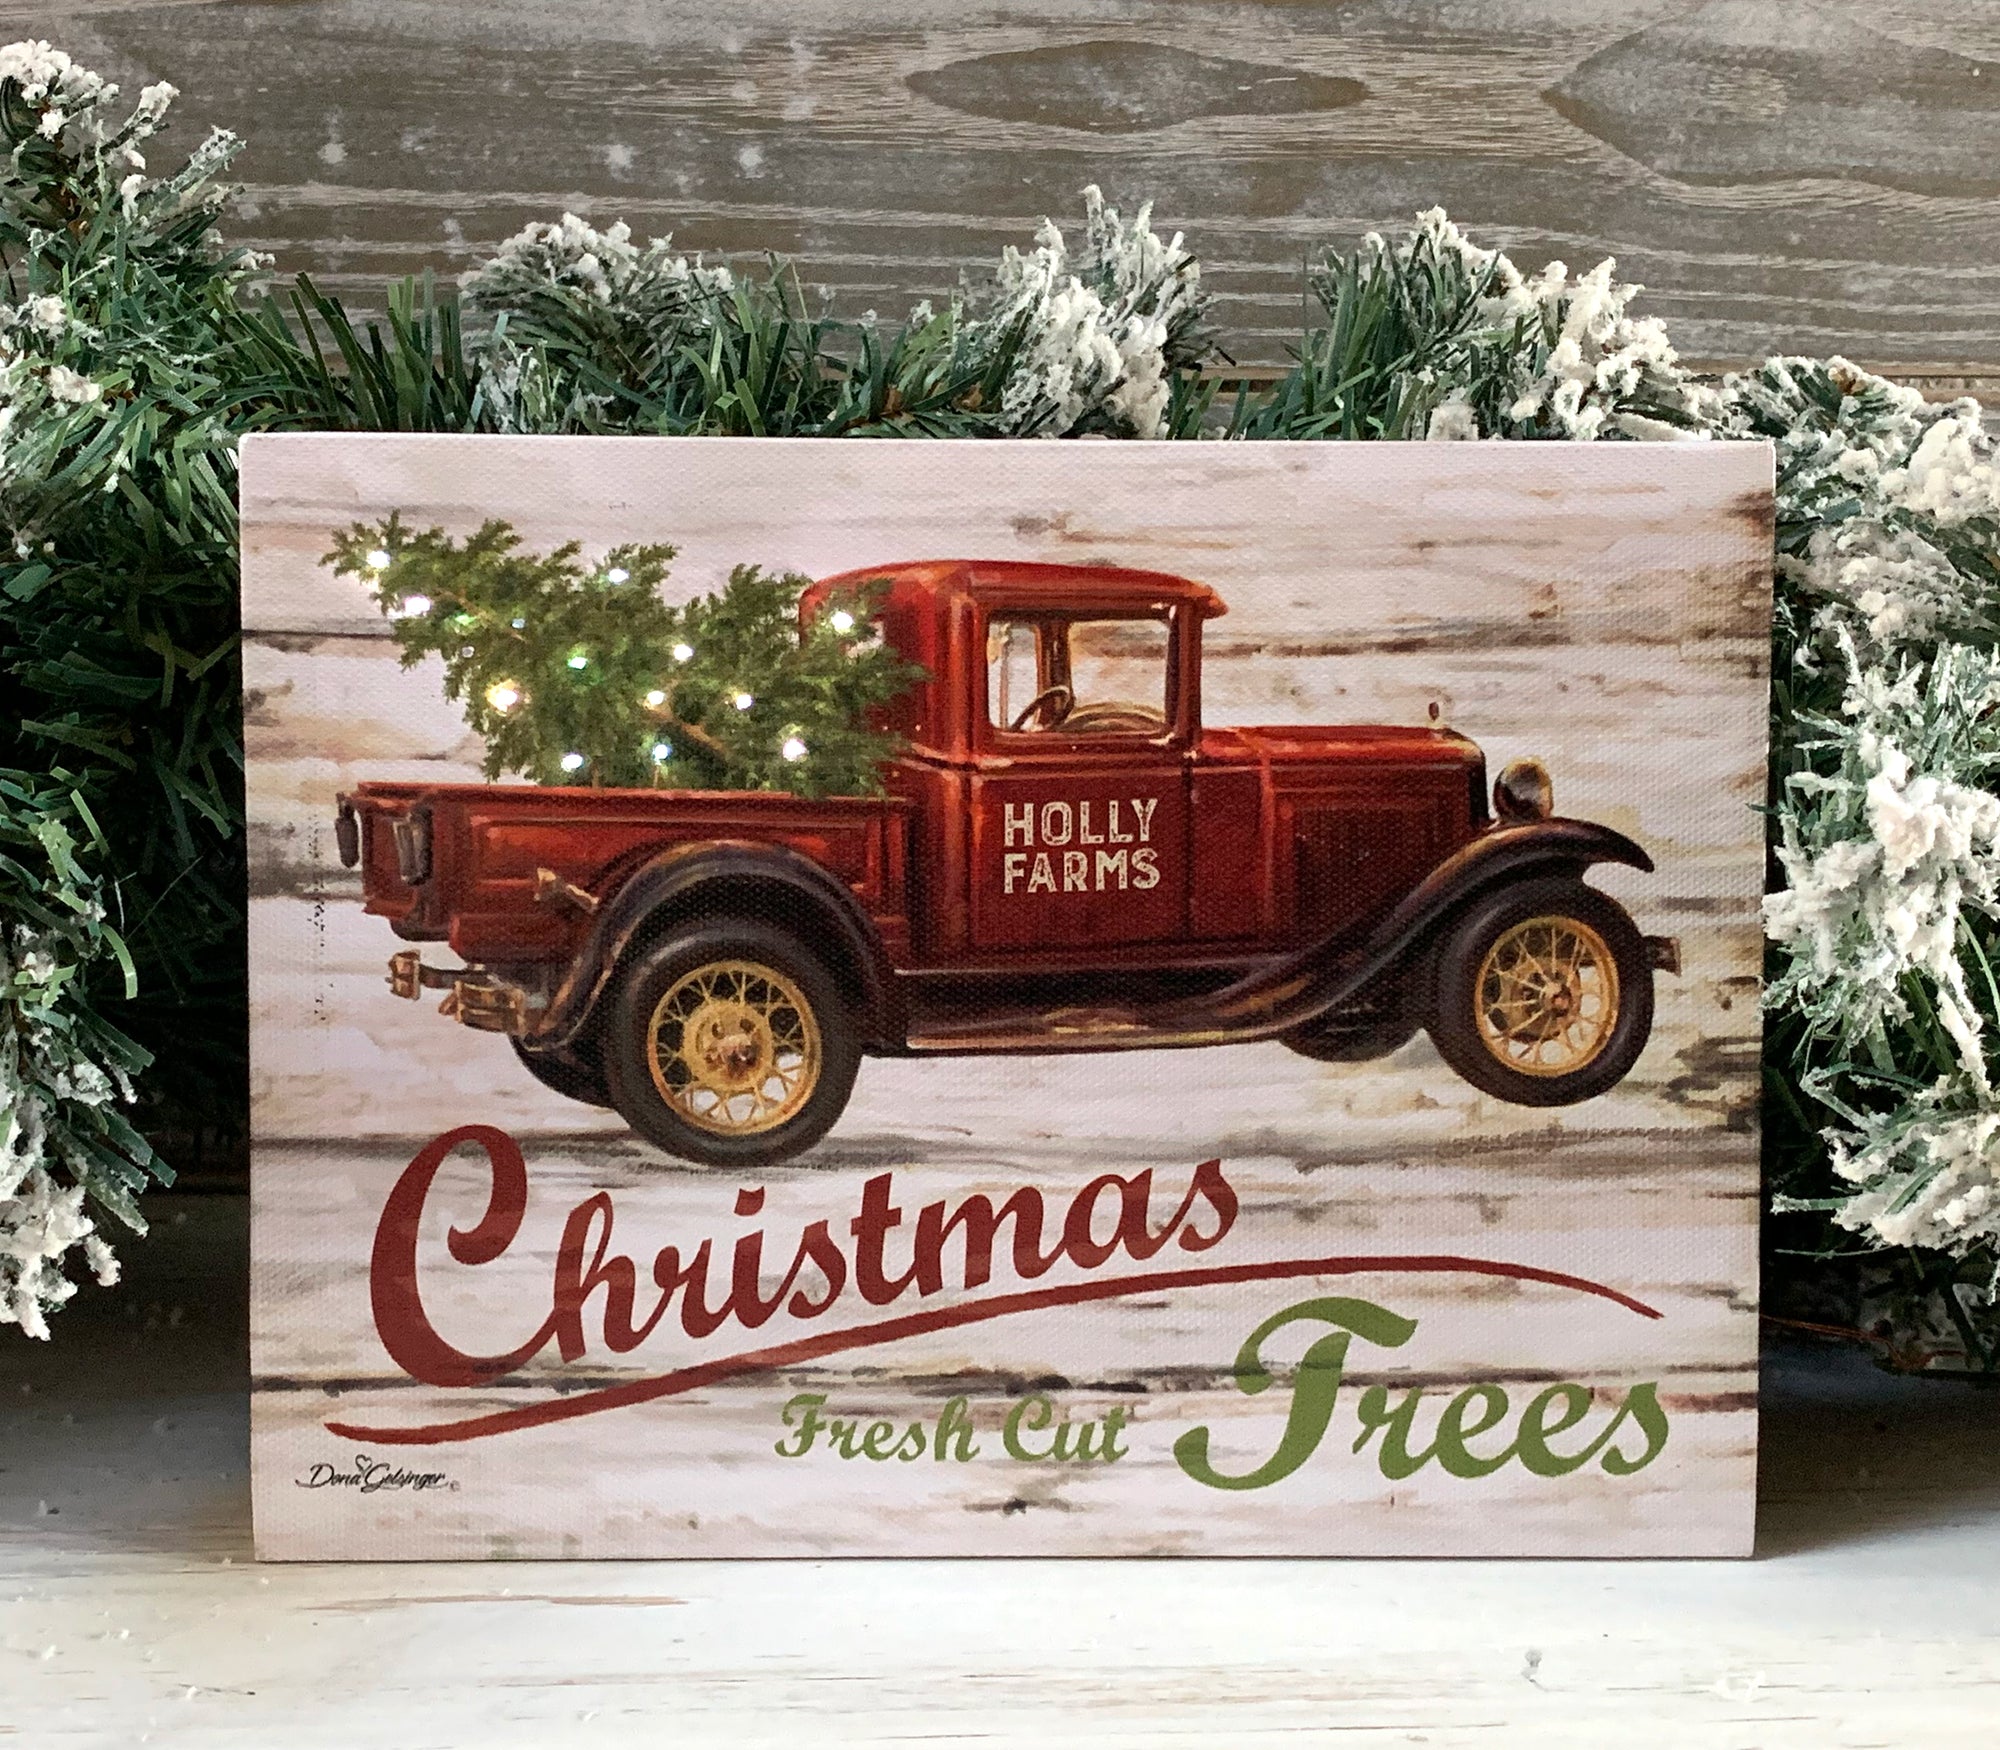 This enchanting piece of art features an iconic old red truck, complete with a fresh cut Christmas tree in the bed and charming lights flickering from it.Beneath the truck, the words "Christmas Fresh Cut Trees"